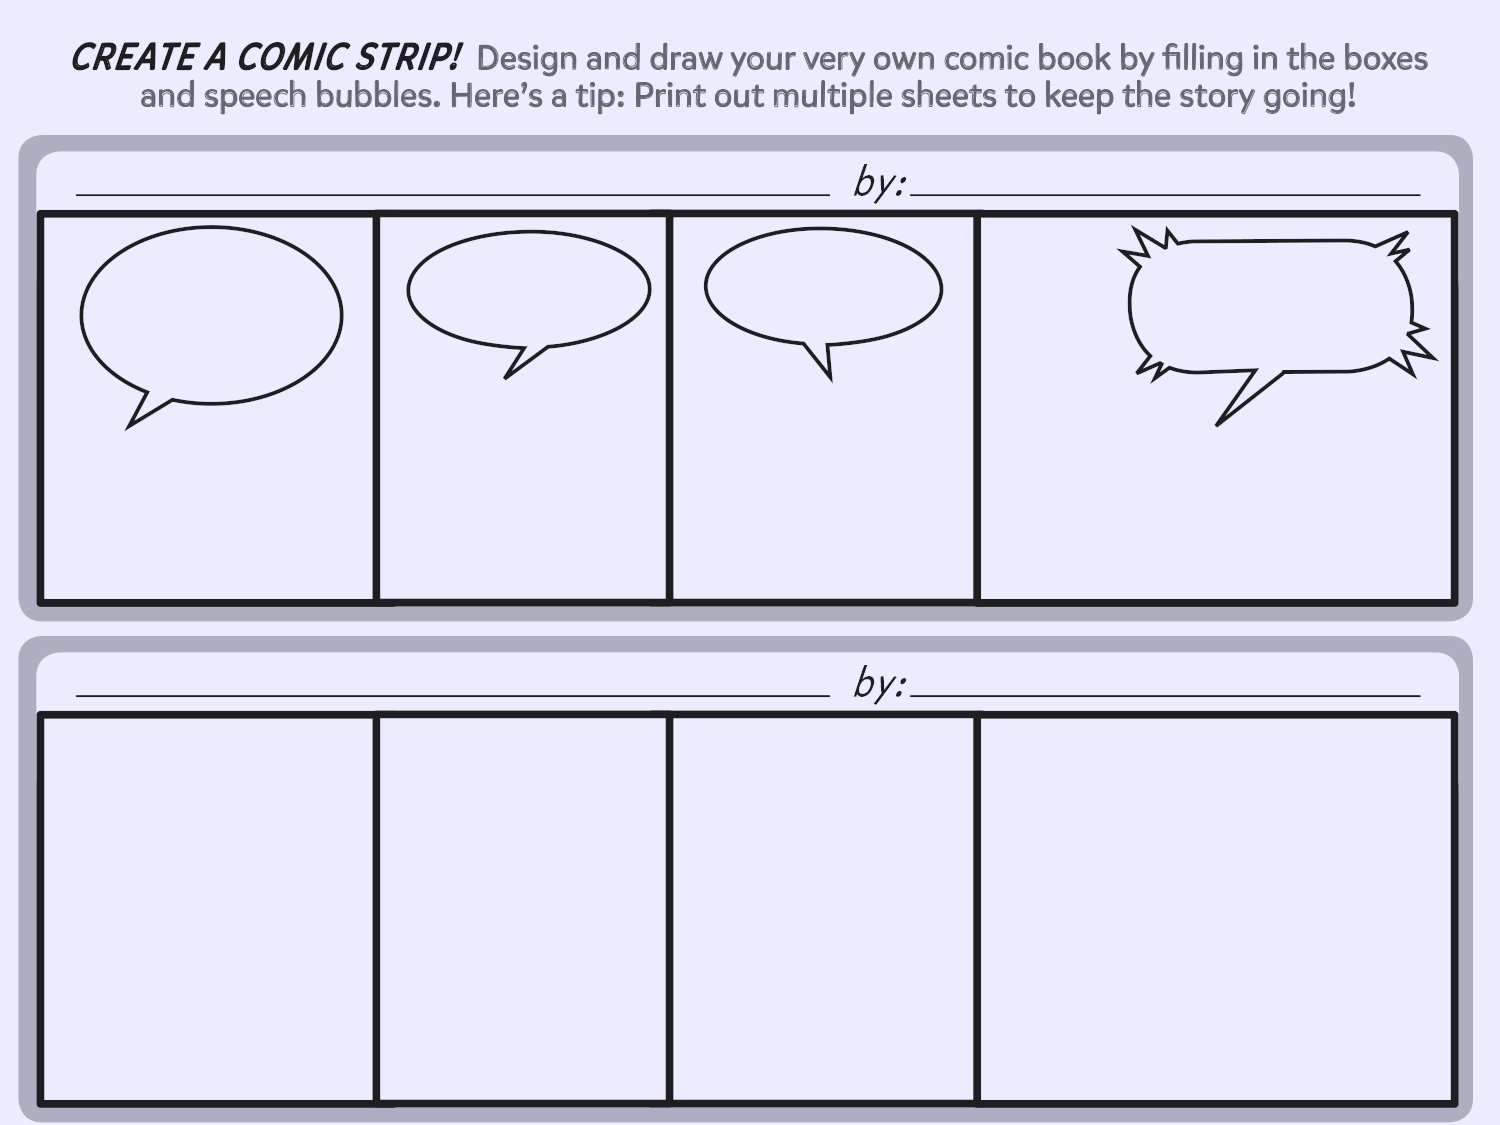 Comic Book Empty: Hero Comic Book Template Is A Great Way To Keep